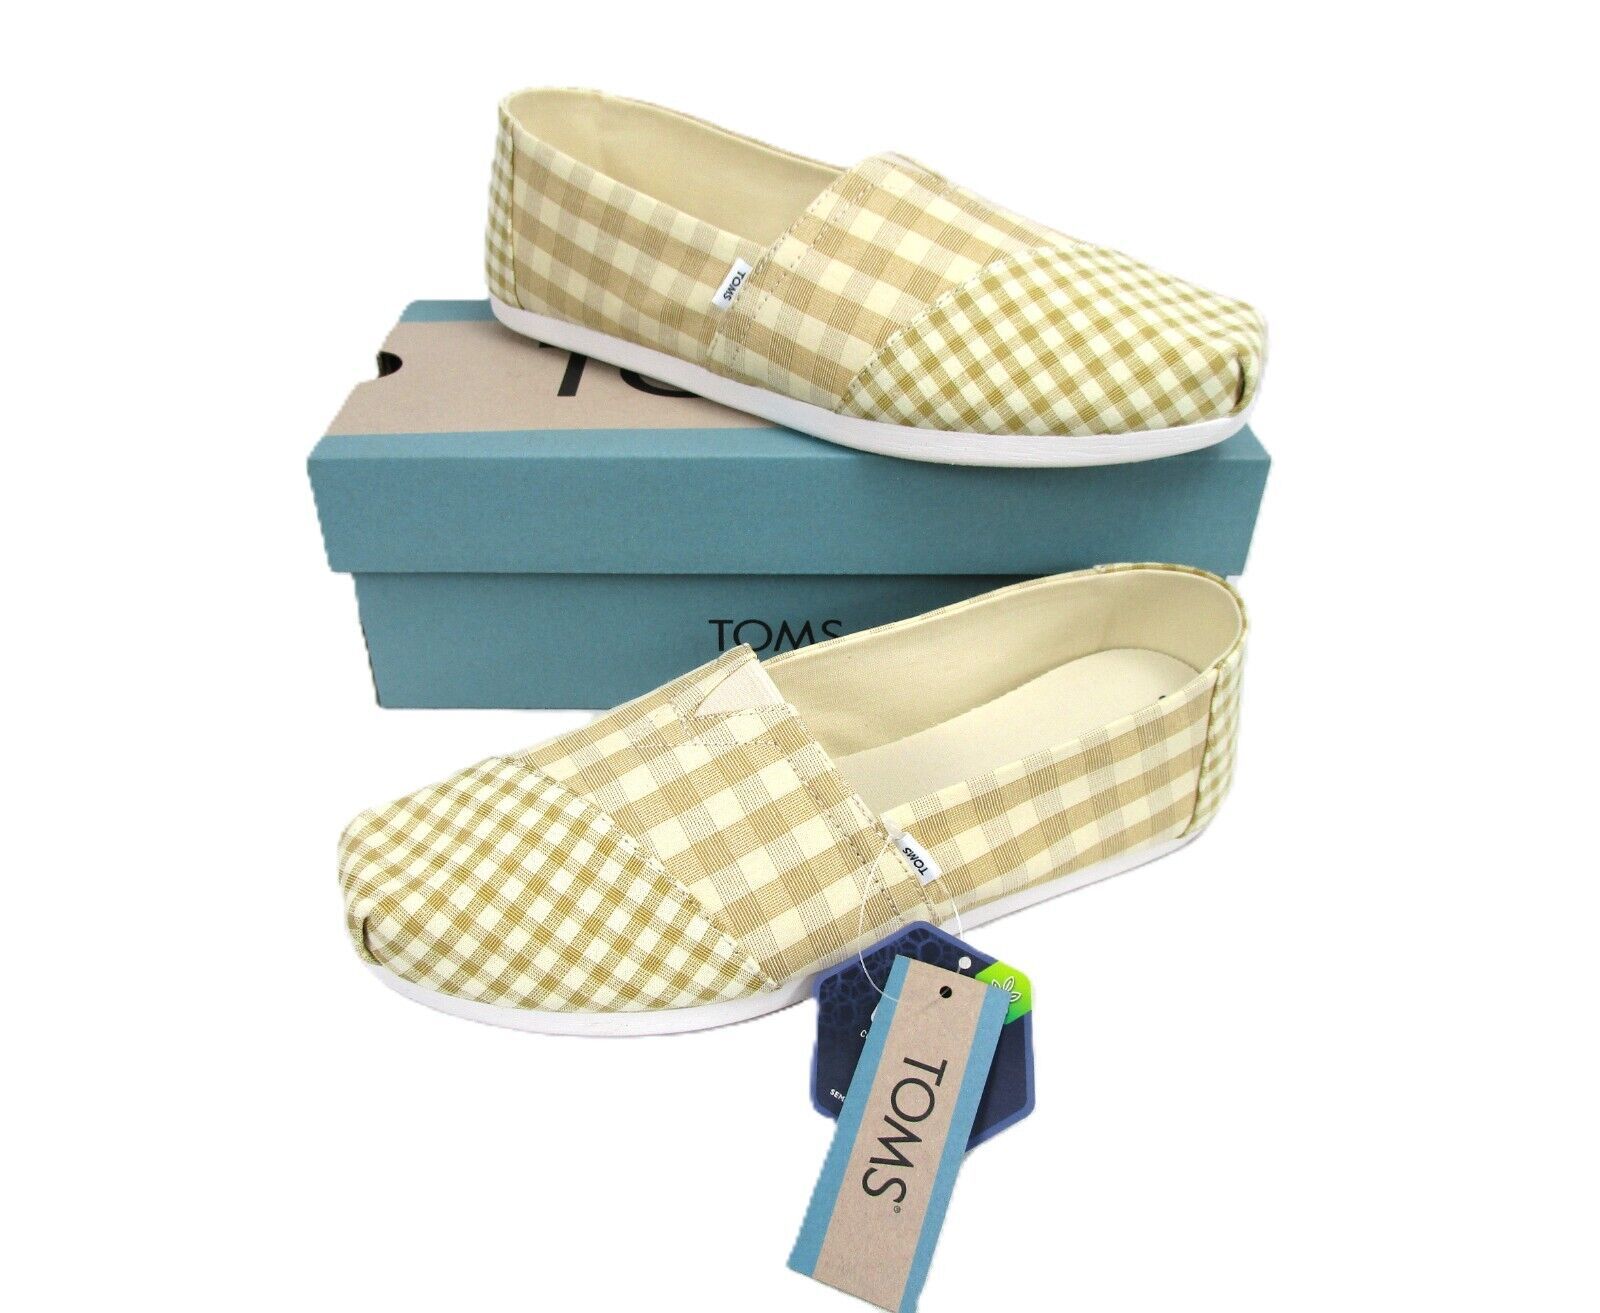 Primary image for TOMS Alpargata Slip-On Espadrille Shoe, Women's Flats w Gingham Check Pattern